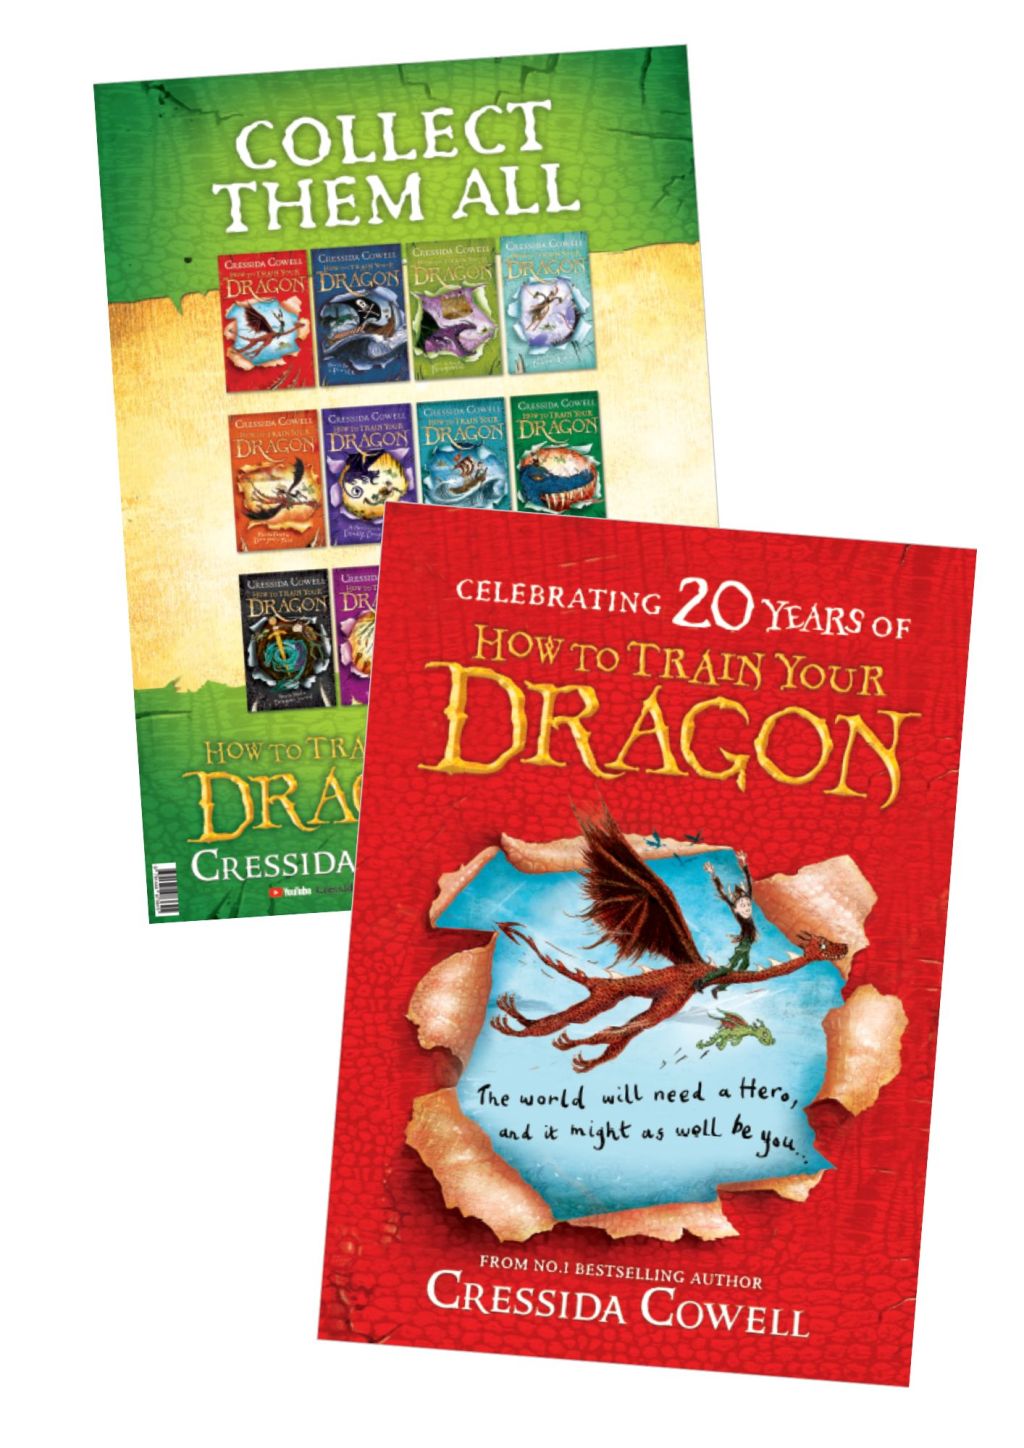 How to Train Your Dragon 20th anniversary poster